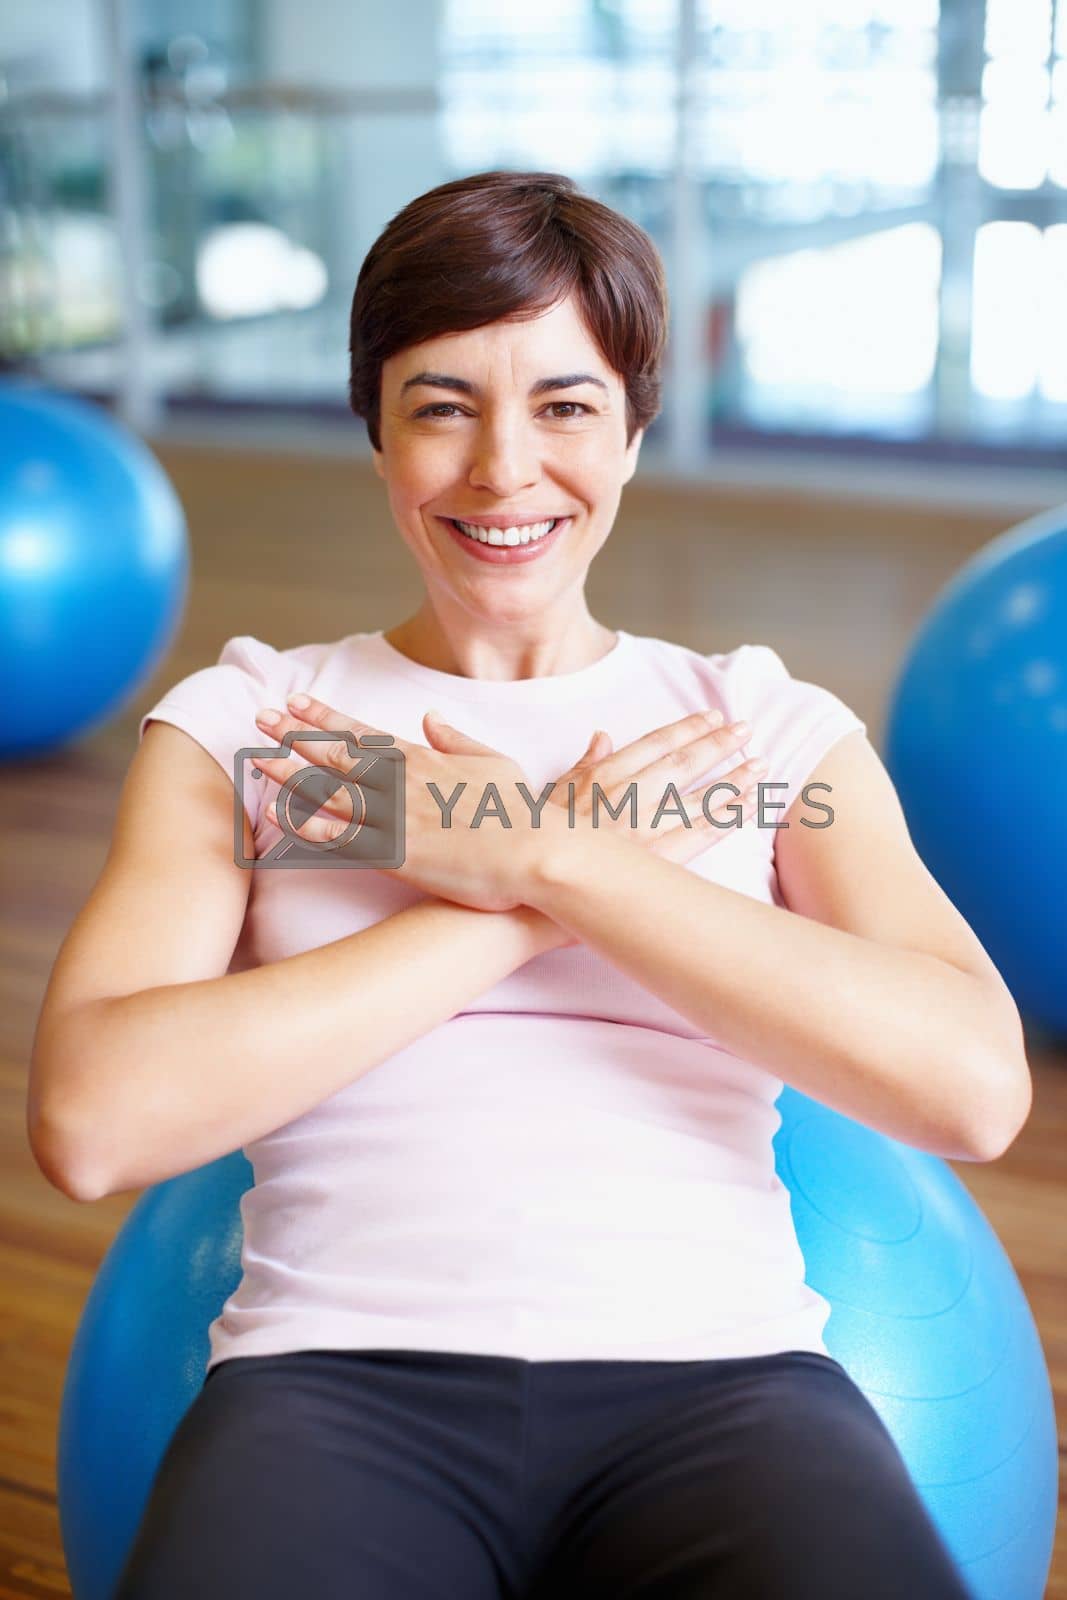 Royalty free image of Woman smiling during workout. Portrait of fit woman smiling while working out on pilates ball. by YuriArcurs